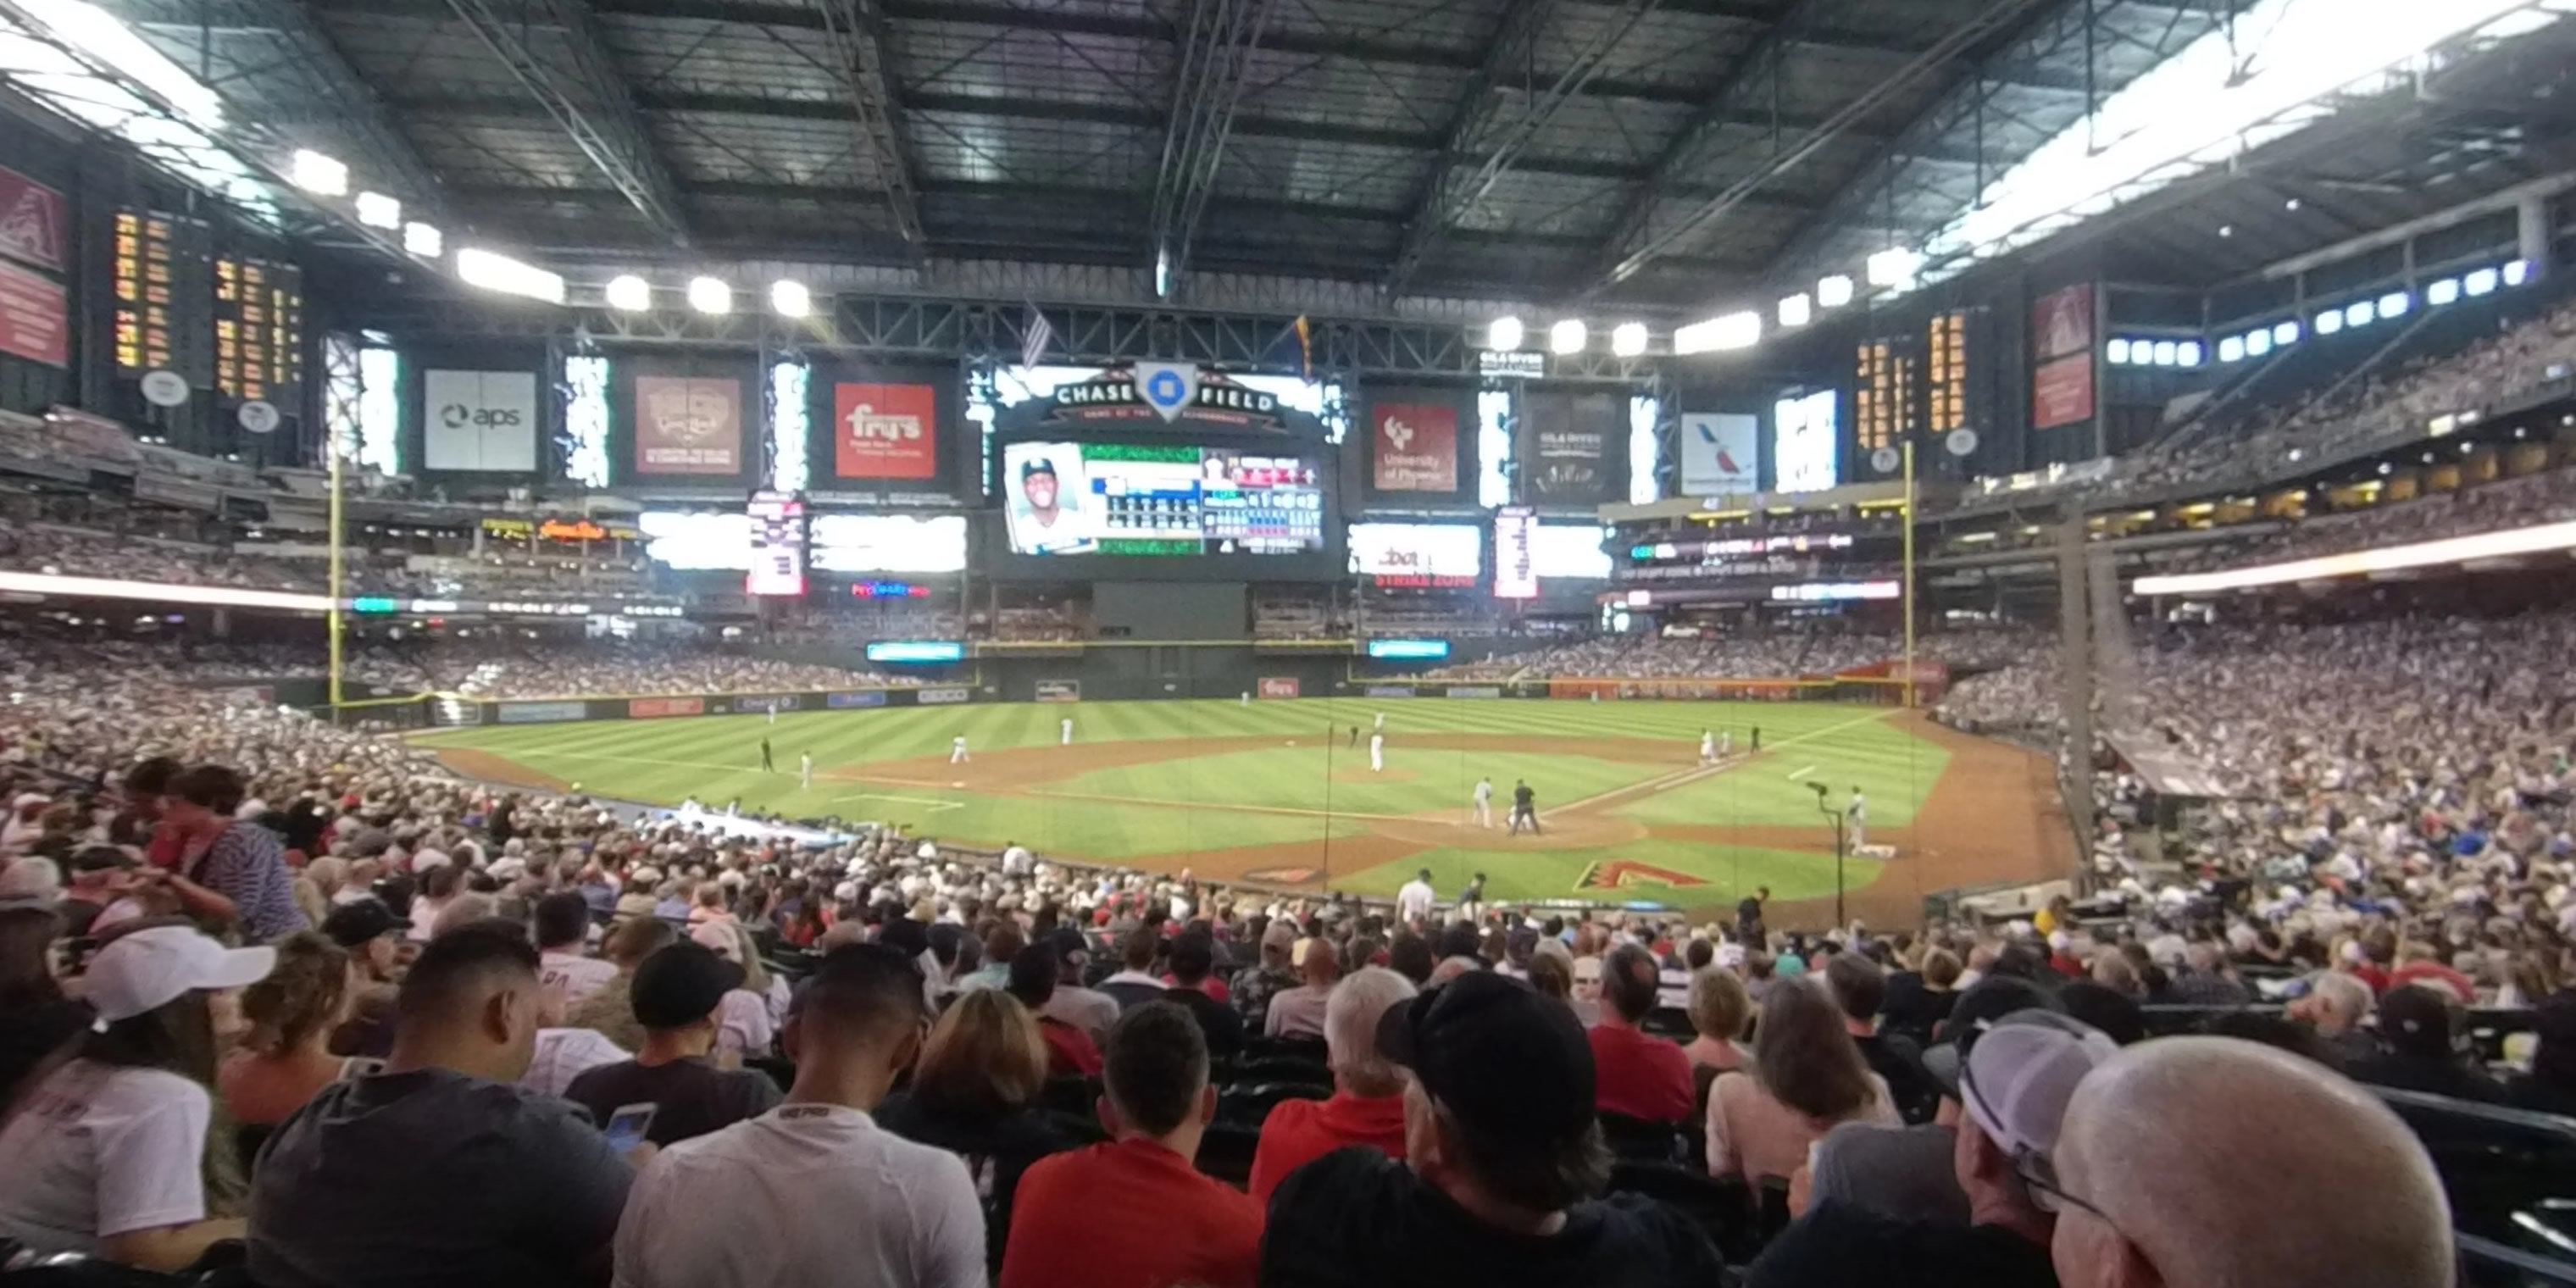 section 123 panoramic seat view  for baseball - chase field